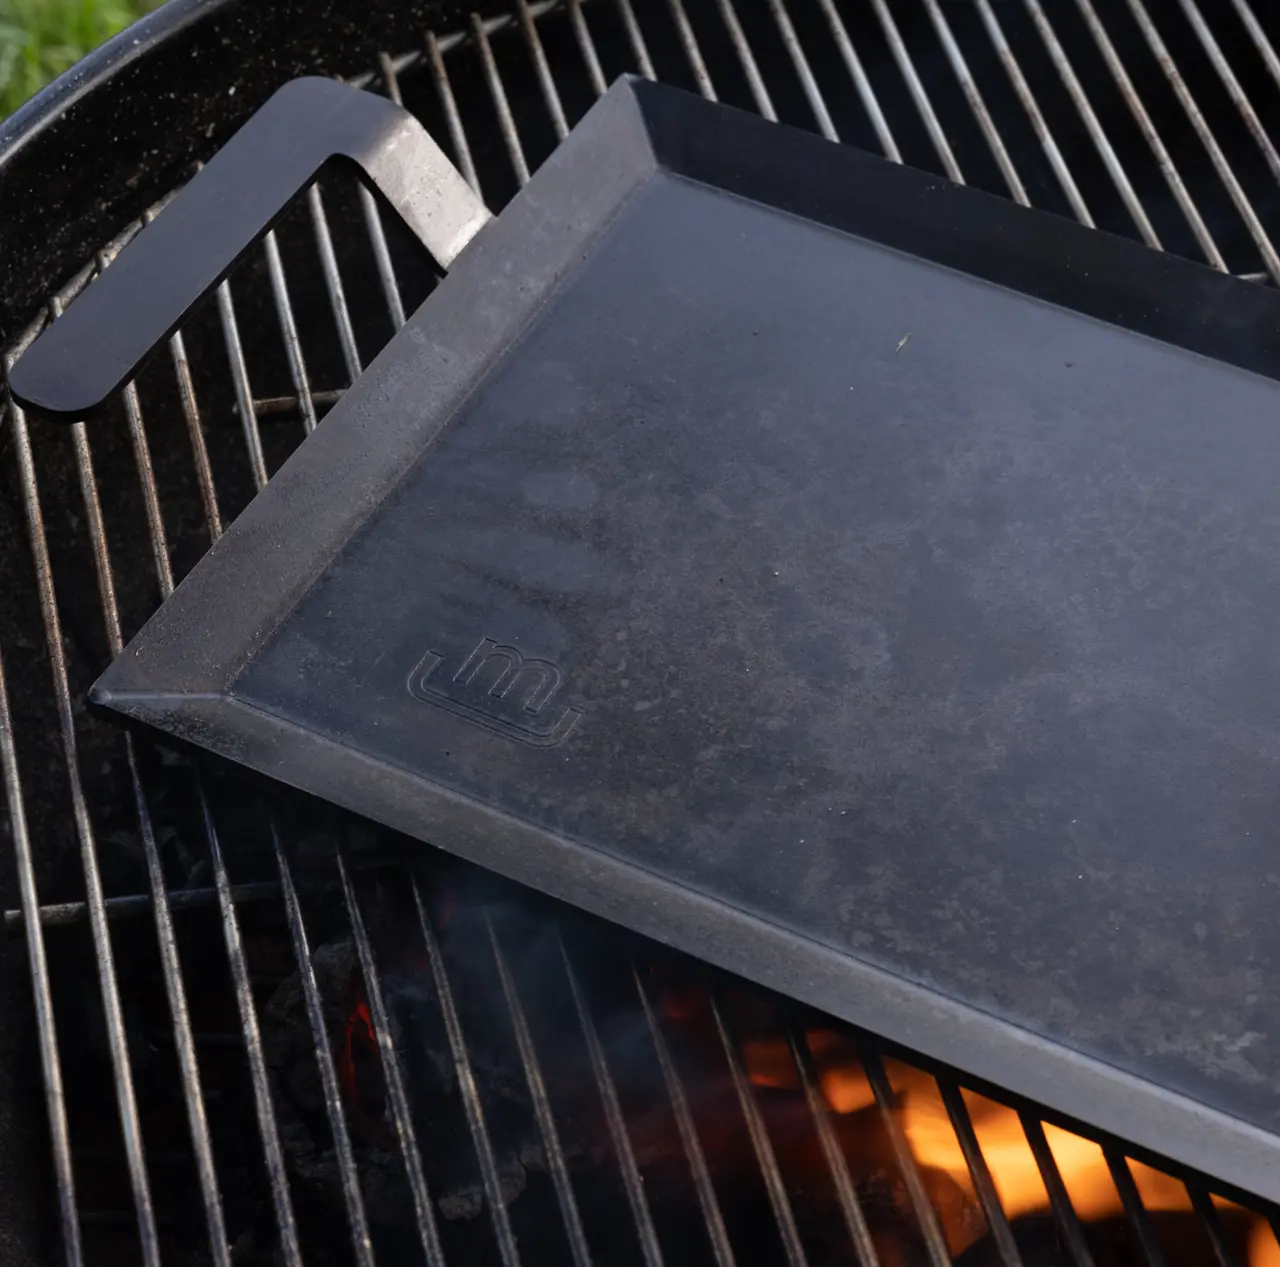 A cast iron griddle sits atop a grill with glowing embers beneath it, ready for cooking.